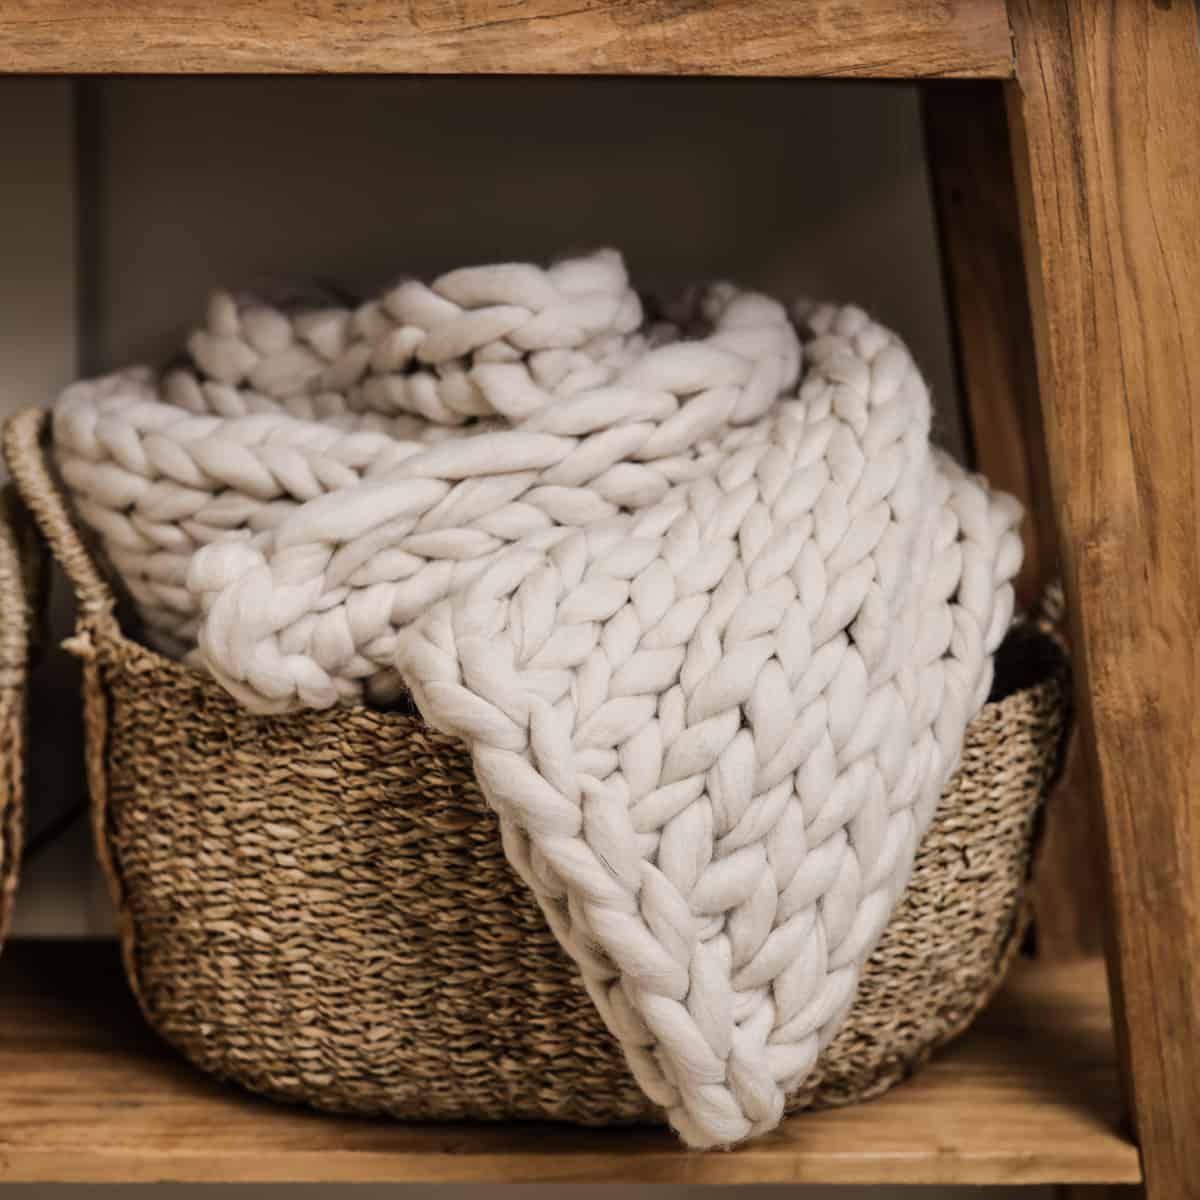 Chunky knitted blanket rolled up in a woven wicker basket.